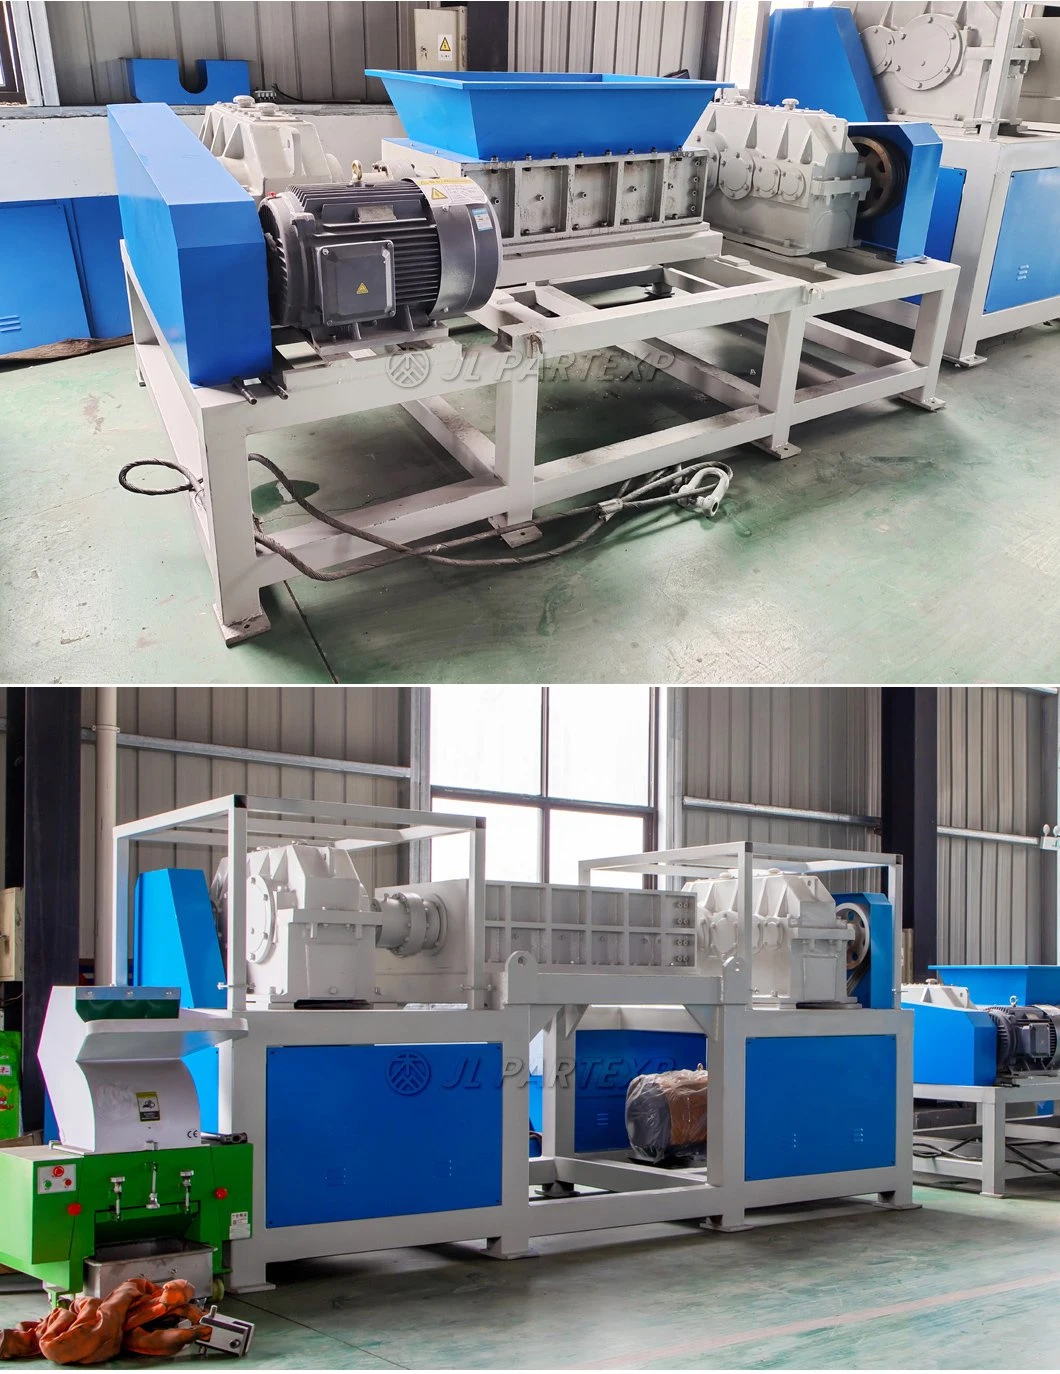 Free Blades Knives!!!Mini Single Shaft Industrial Mechanical Dead Animals Poultry Beef/Pig/Chicken Meat/Bone/Carcass/Body Recycling Shredder Recycling Equipment